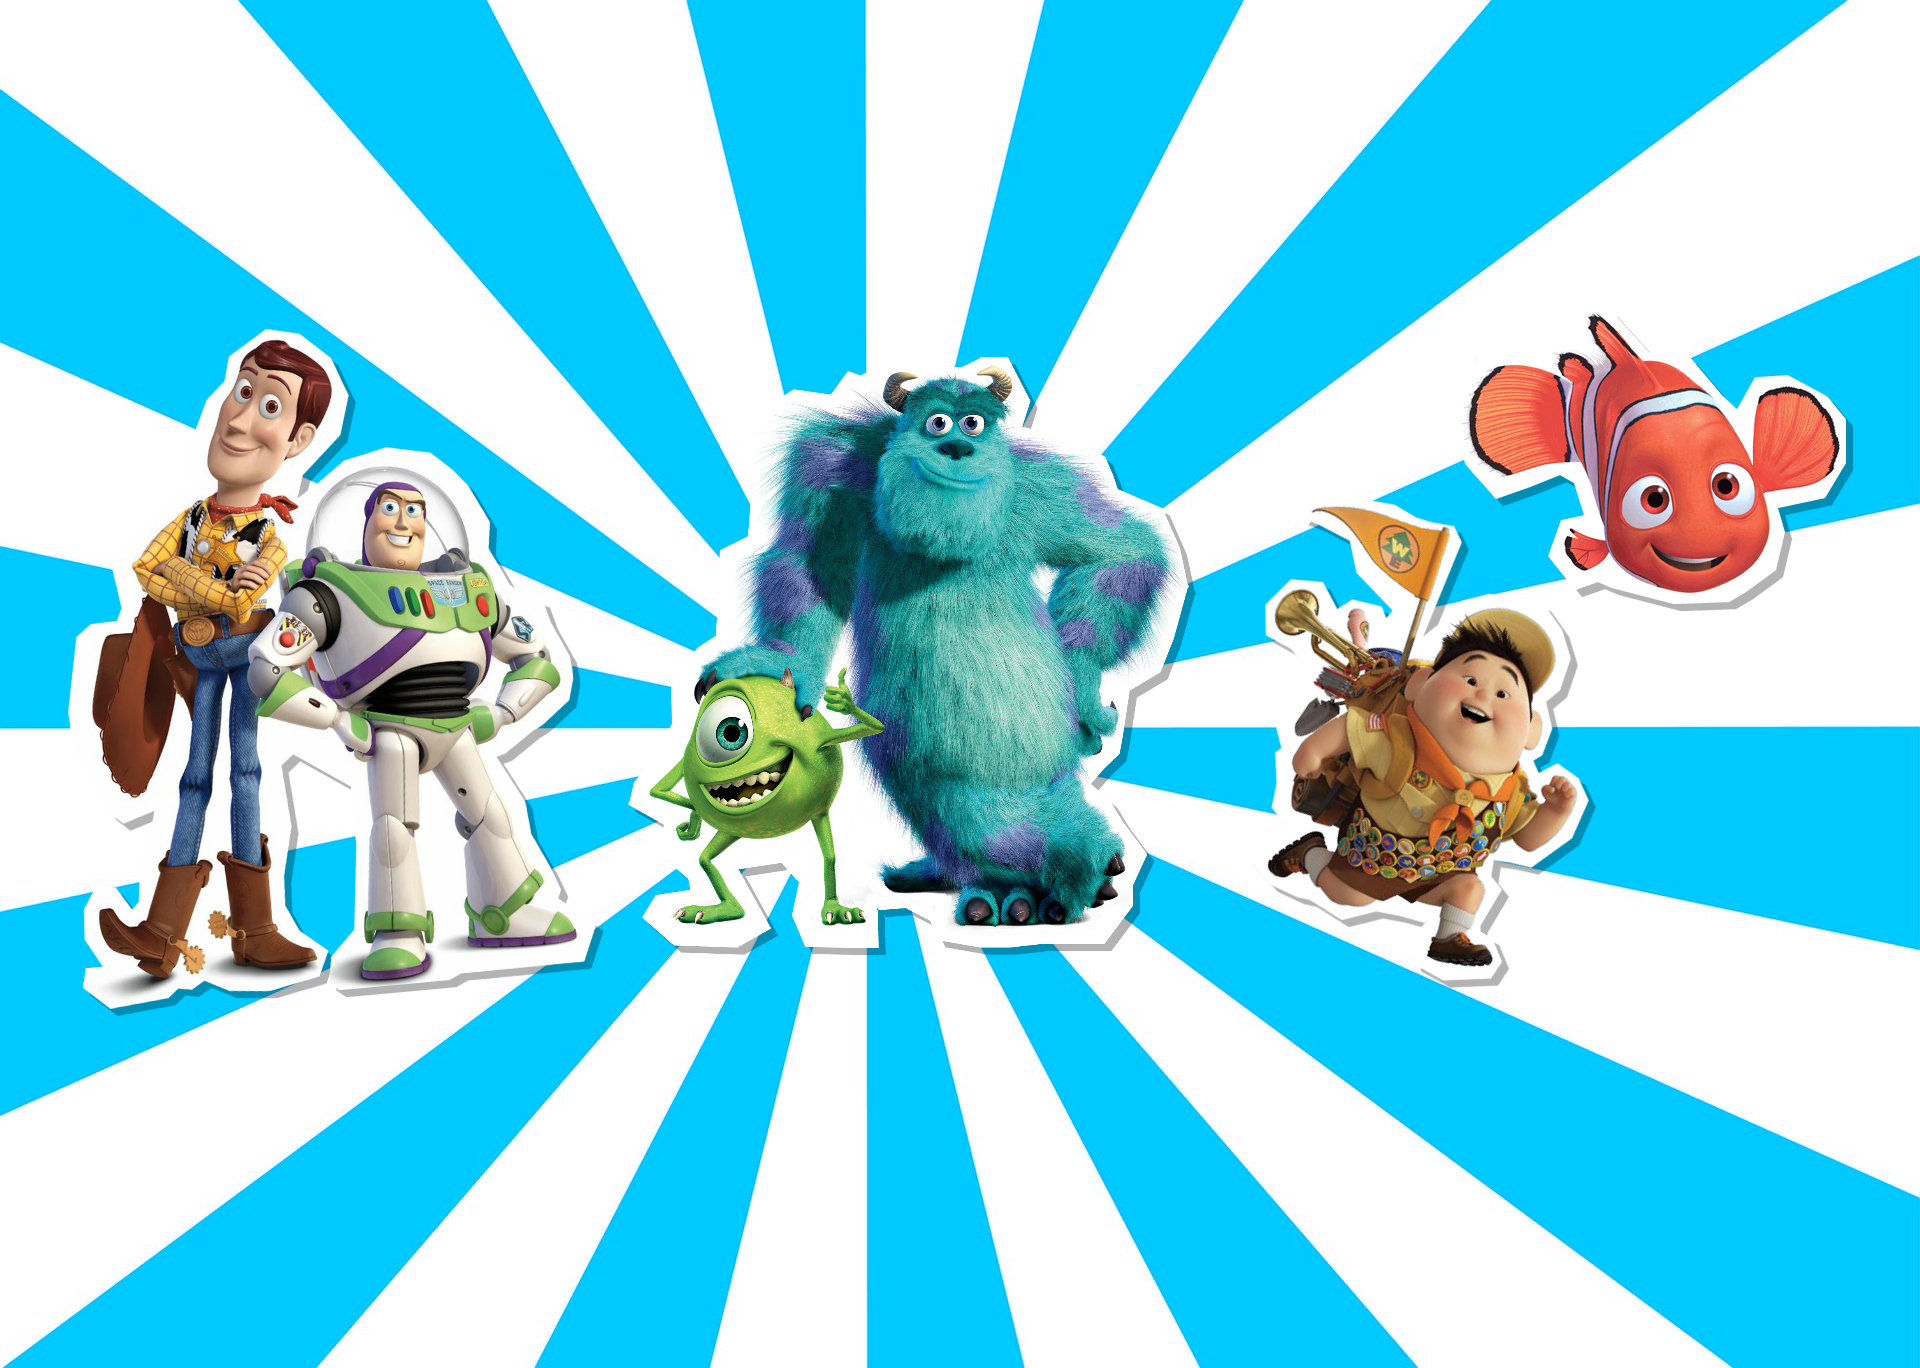 Pixar films Toy Story Monsters Inc Finding Nemo and Up